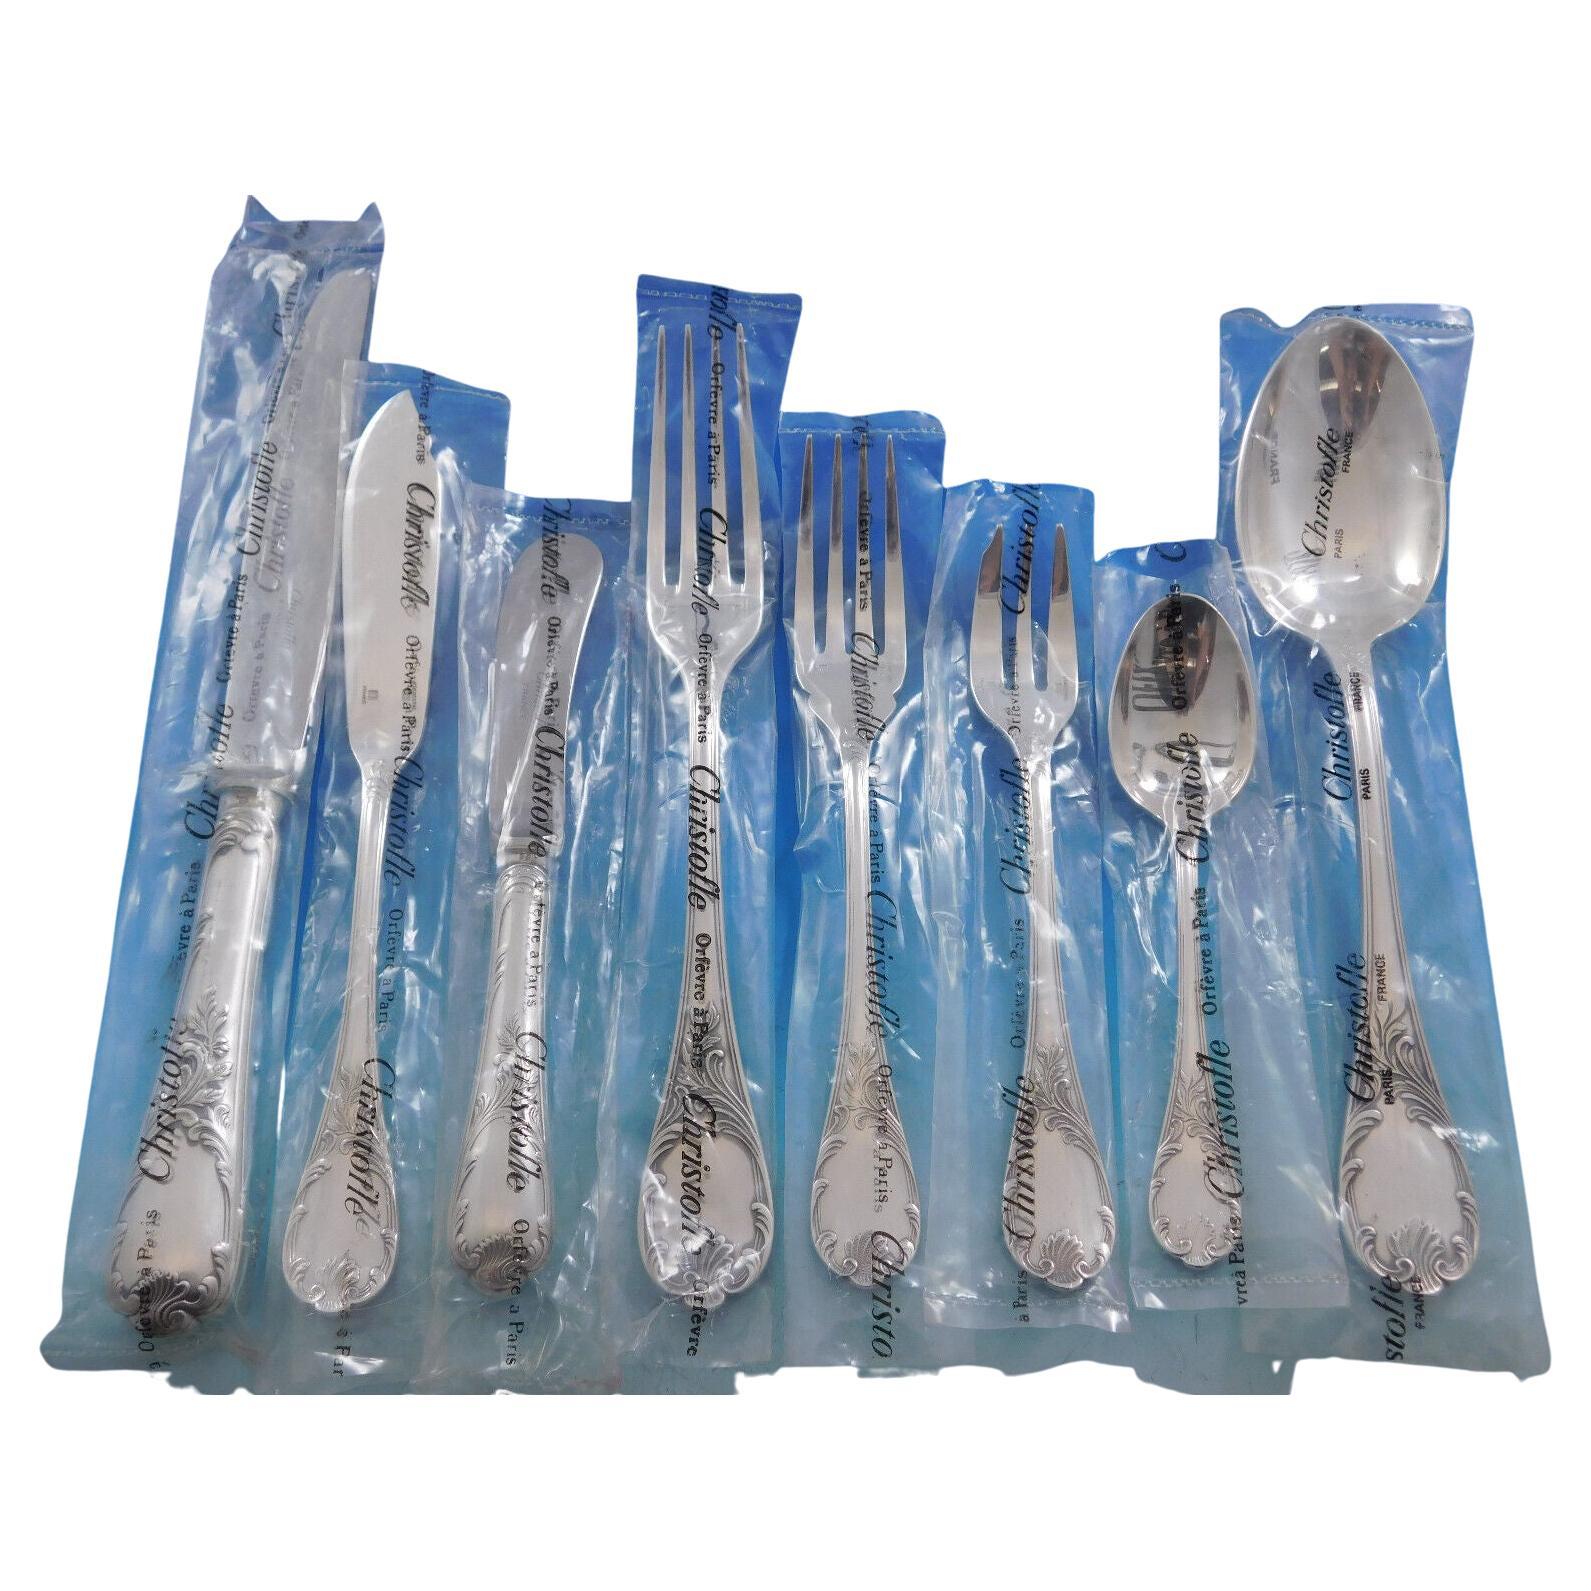 Marly by Christofle France Silverplate Flatware Service Set 51 Pcs Dinner Unused For Sale